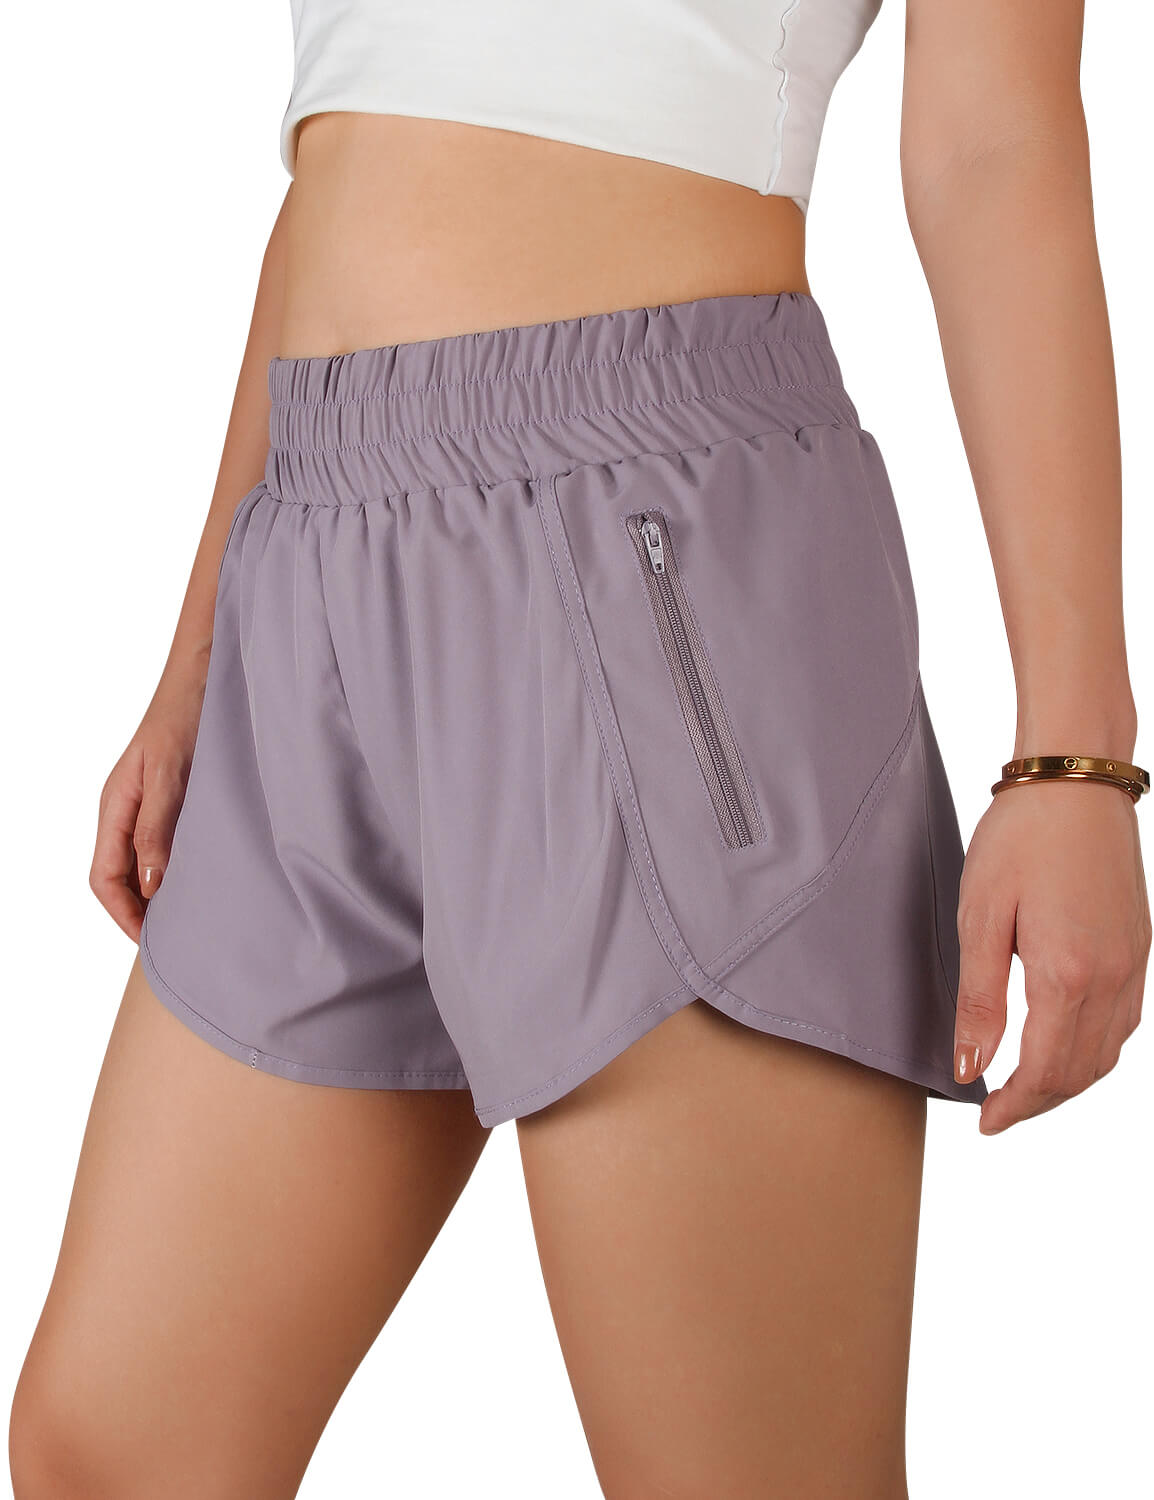 Blooming Jelly Women's Quick-Dry Running Shorts